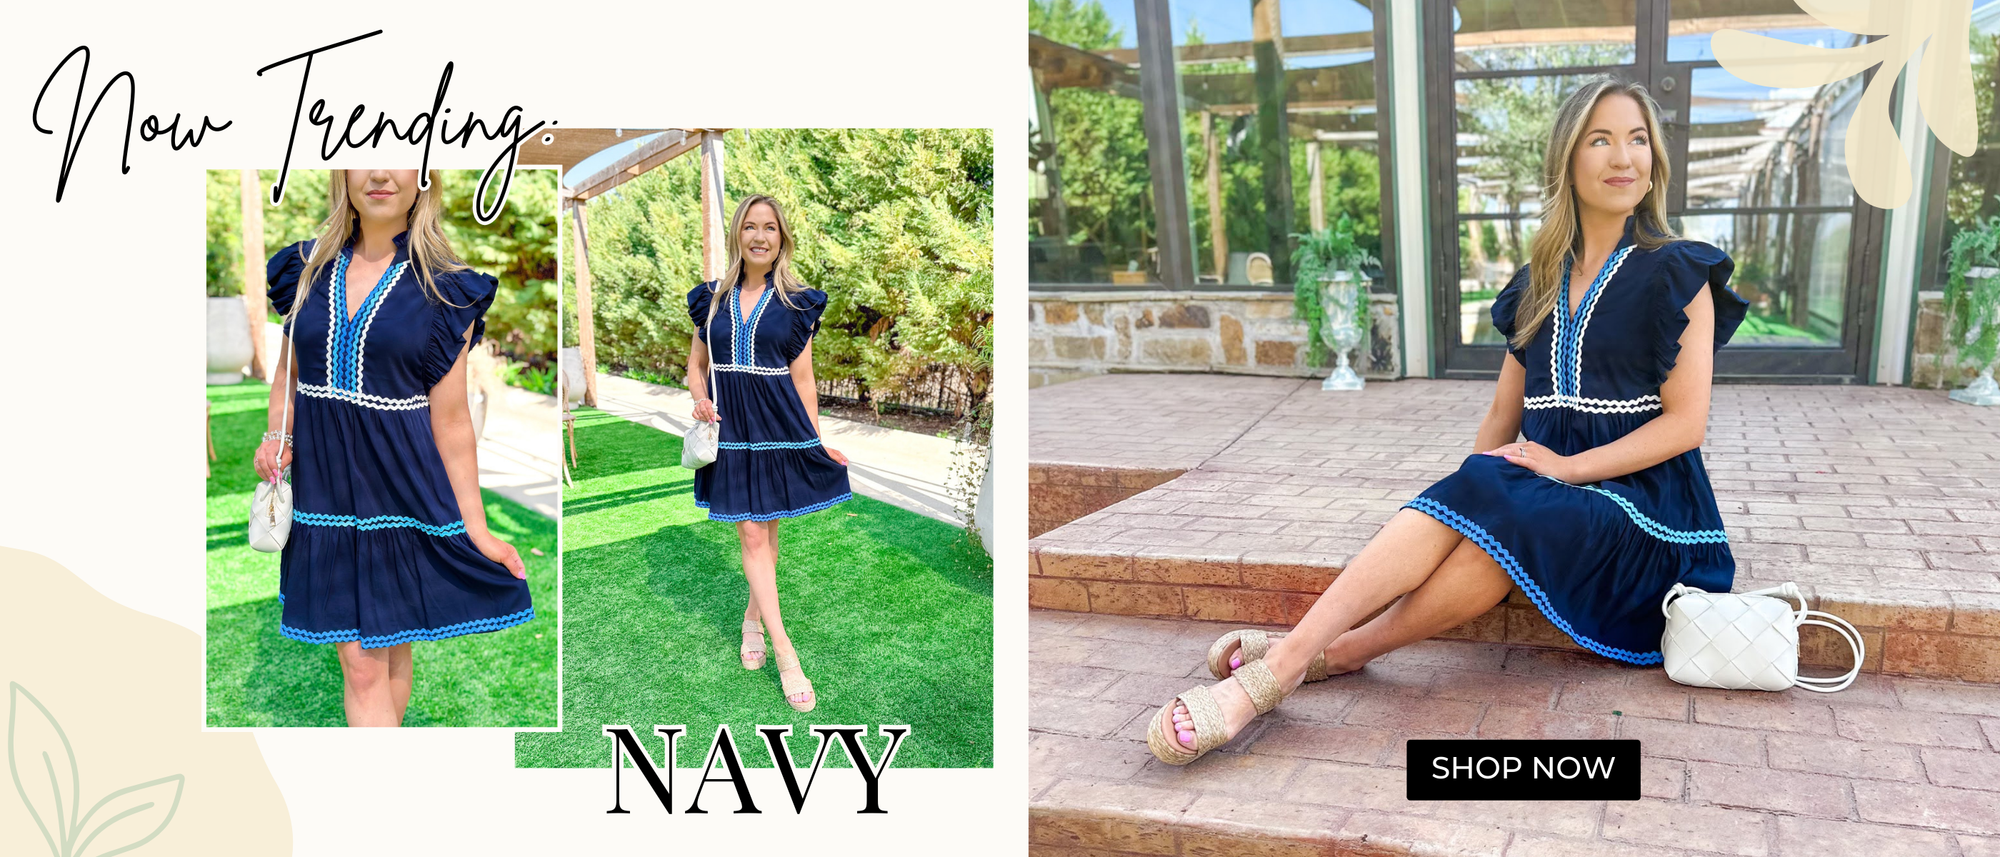 Now trending: navy. Shop now. Model is wearing a navy mini dress with ruffle detail over the shoulder and rick and rack in different shades of blue and white. Styled with a white woven faux leather handbag and raffia platform shoes.